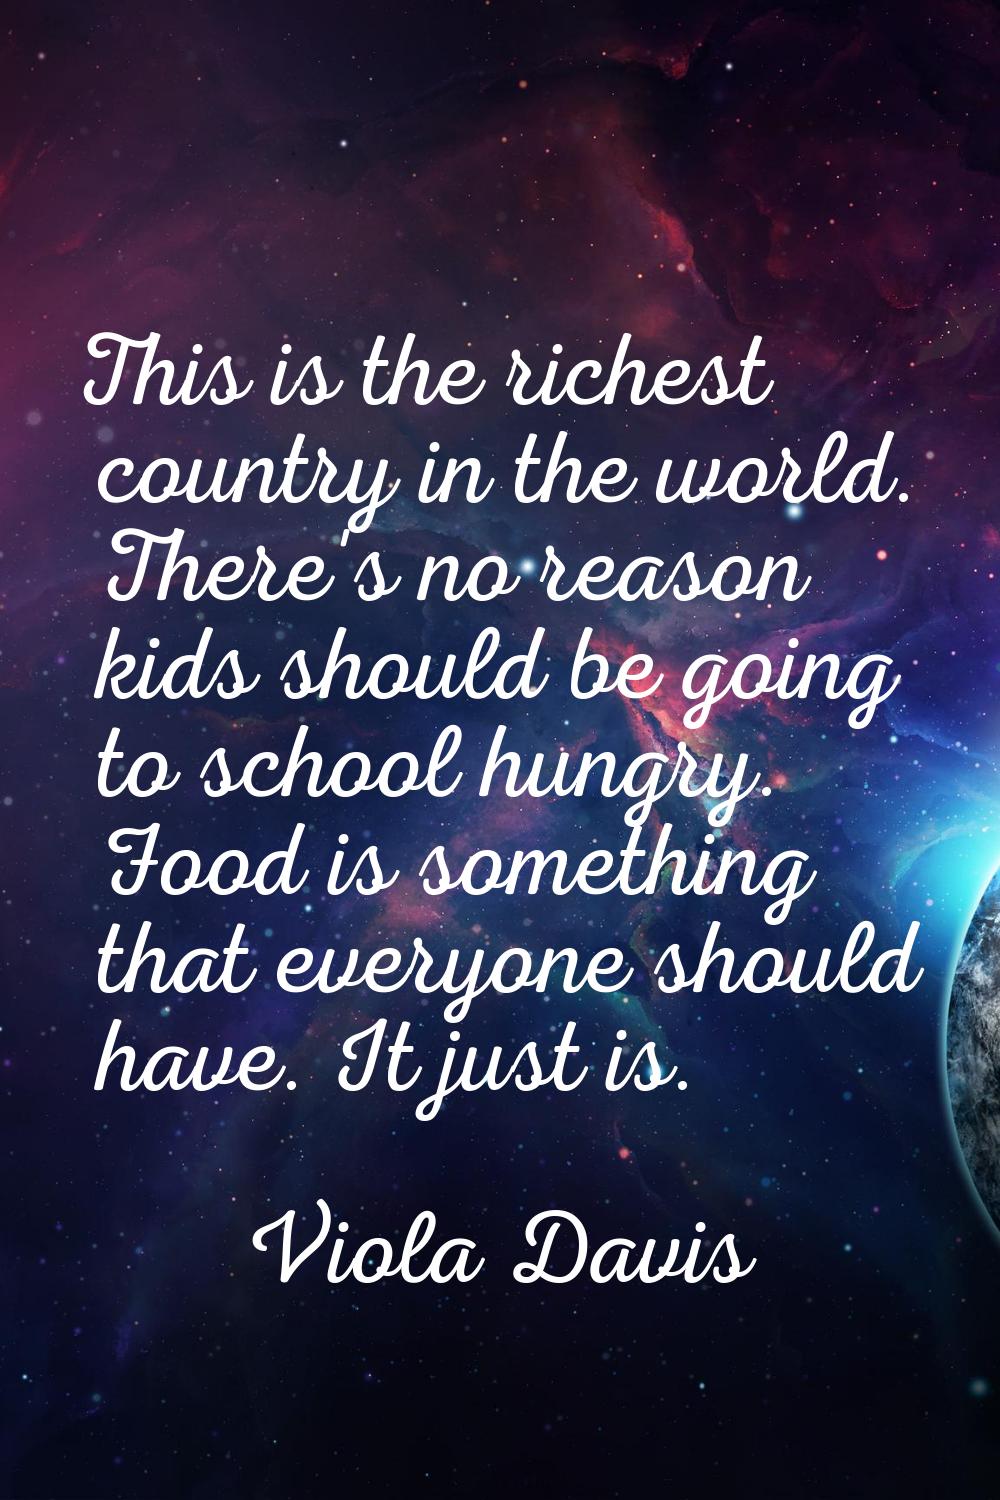 This is the richest country in the world. There's no reason kids should be going to school hungry. 